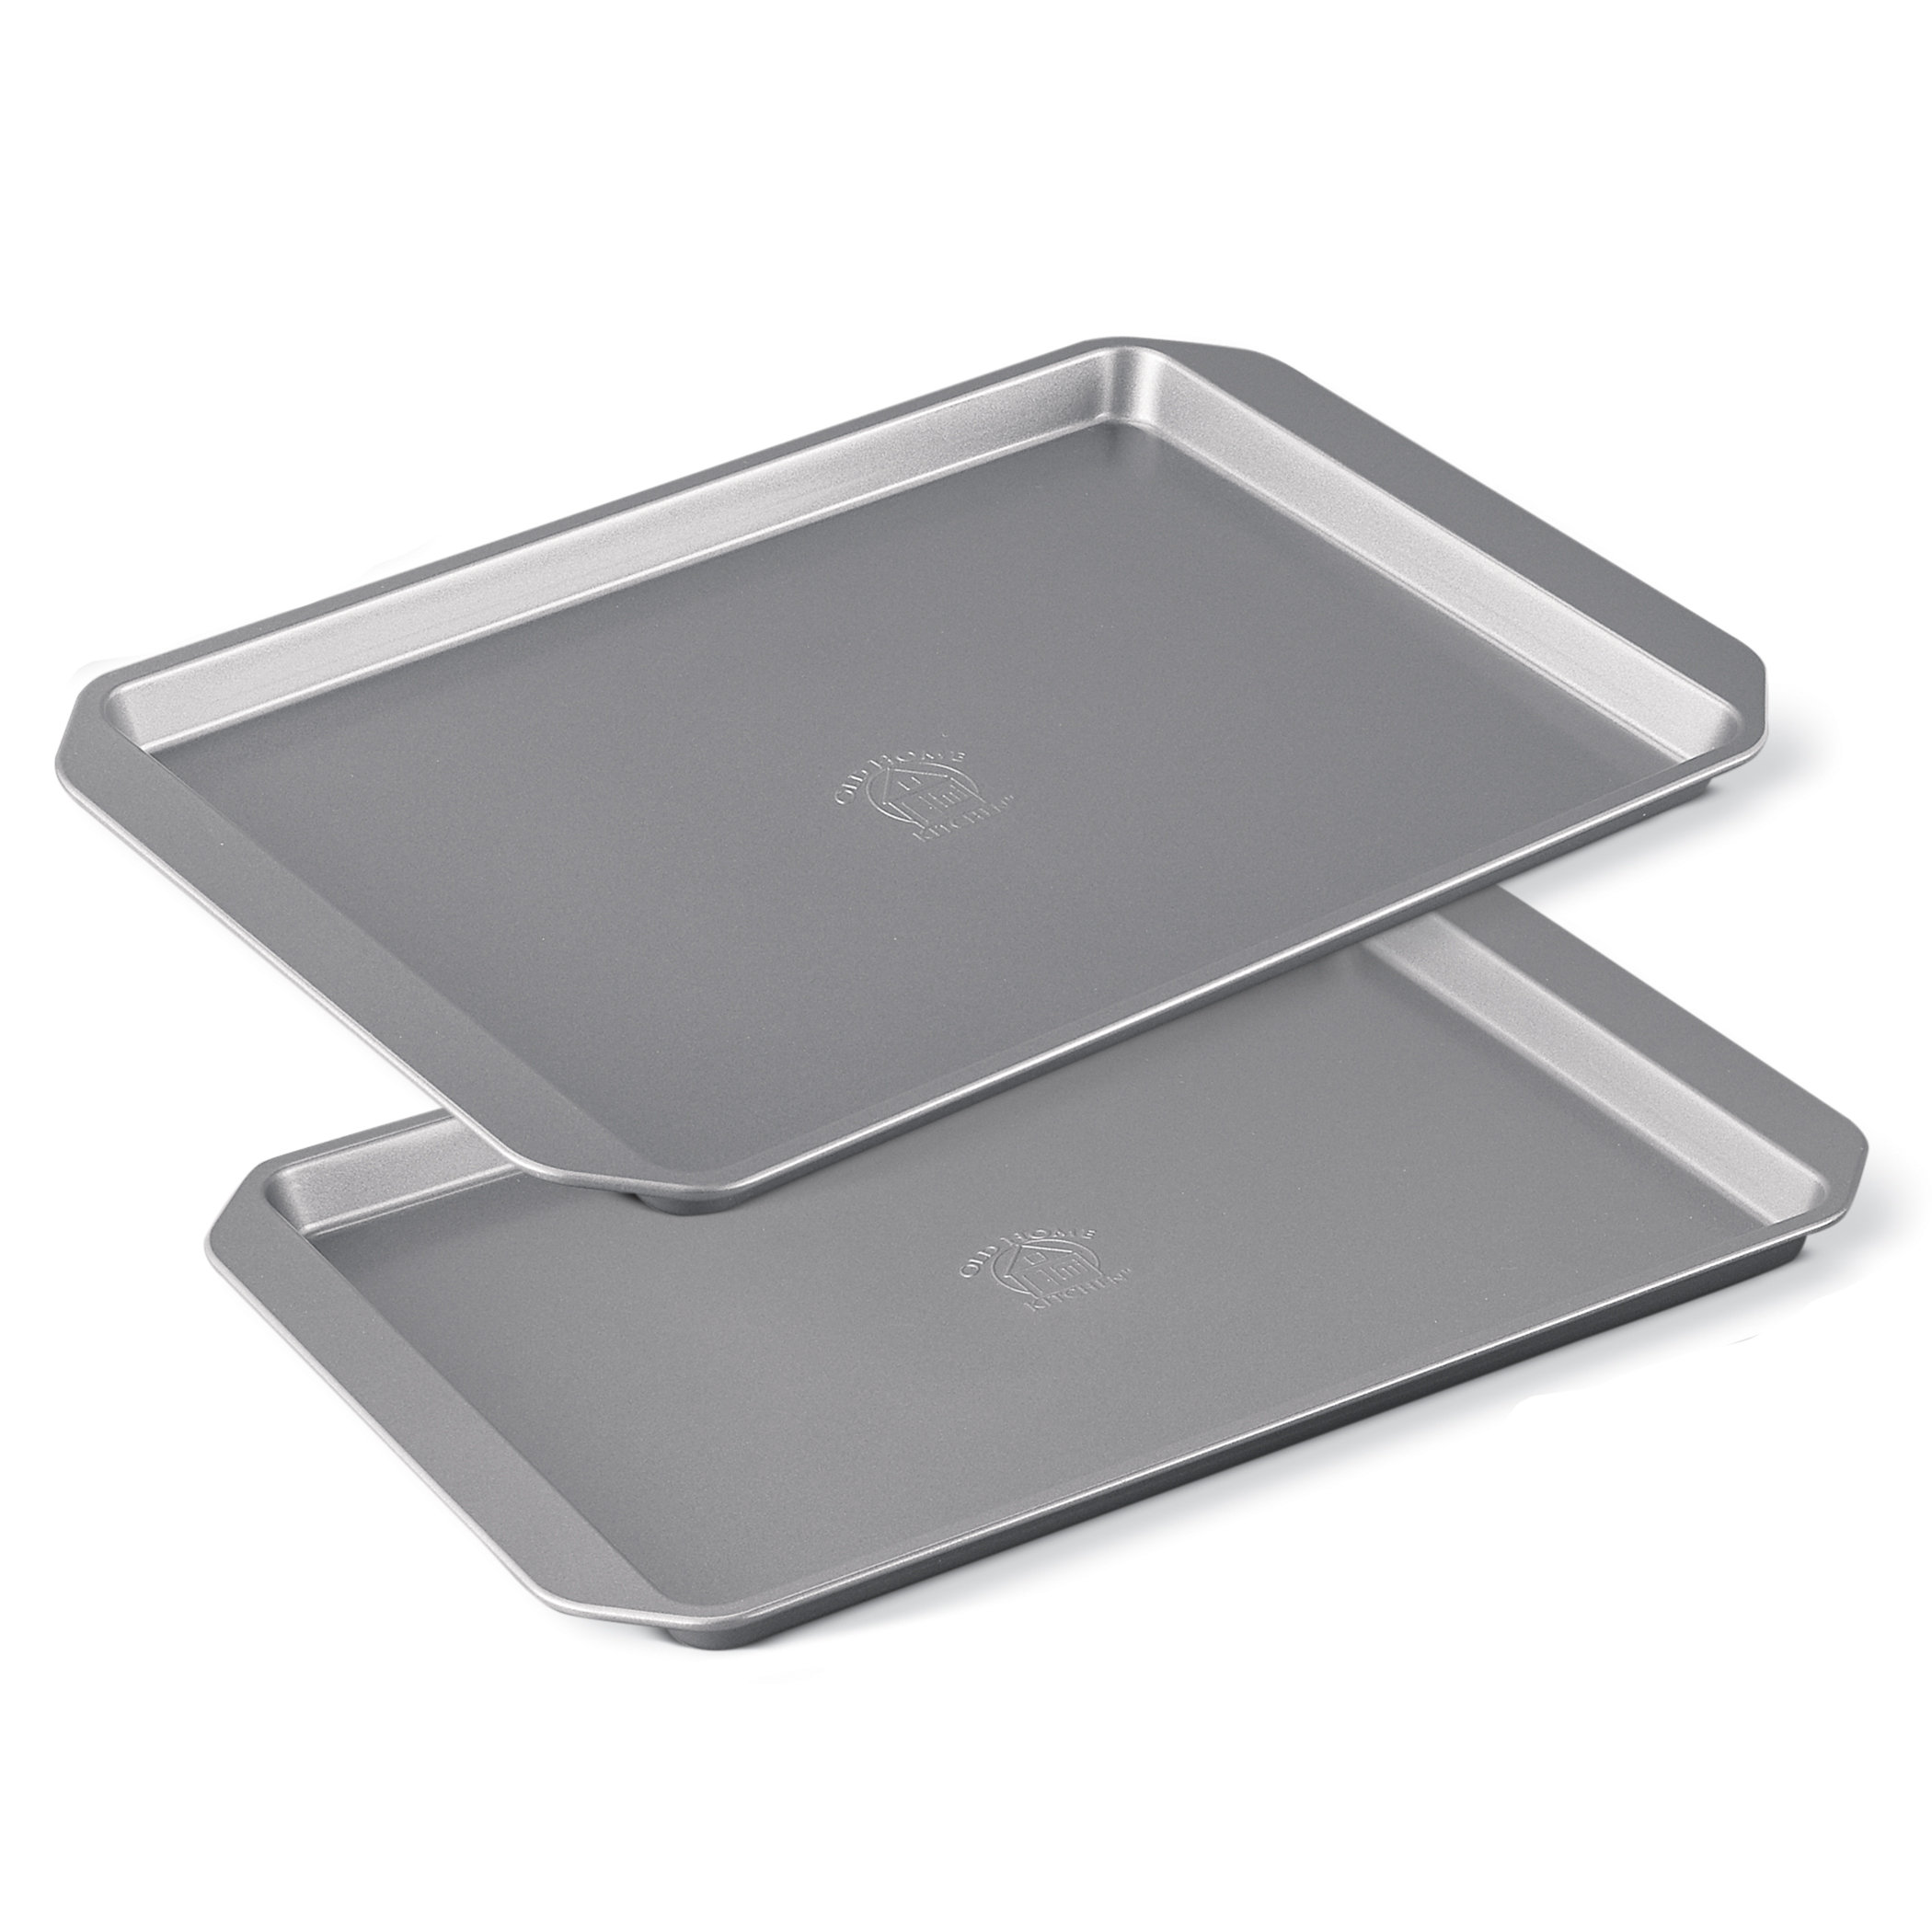 Tasty Carbon Steel Non-Stick 3 Piece Baking Sheet Set with Cookie